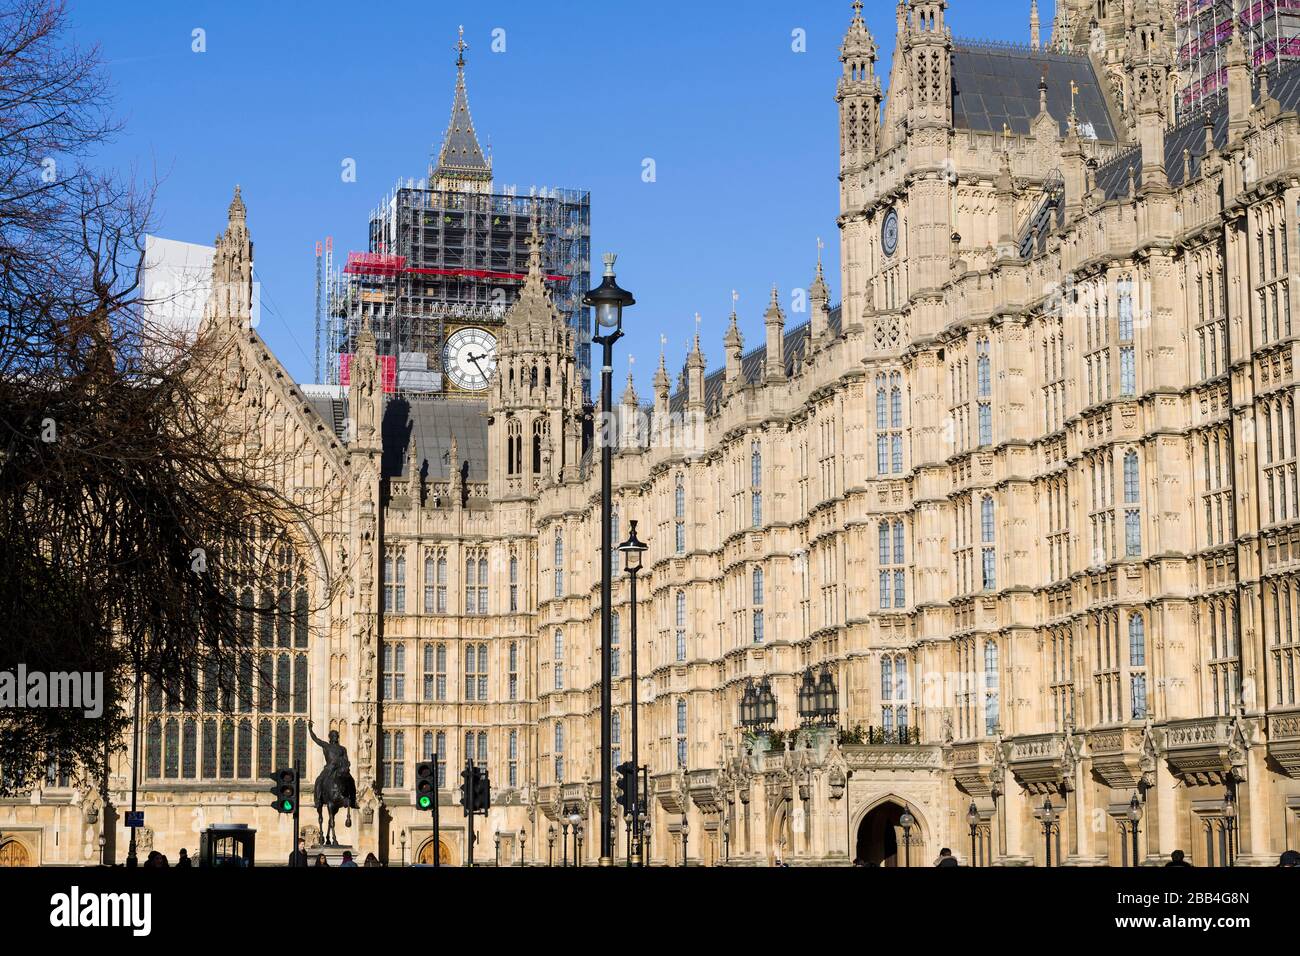 The Palace of Westminster is the meeting place of the House of Commons and the House of Lords, the two houses of the Parliament of the United Kingdom. Stock Photo